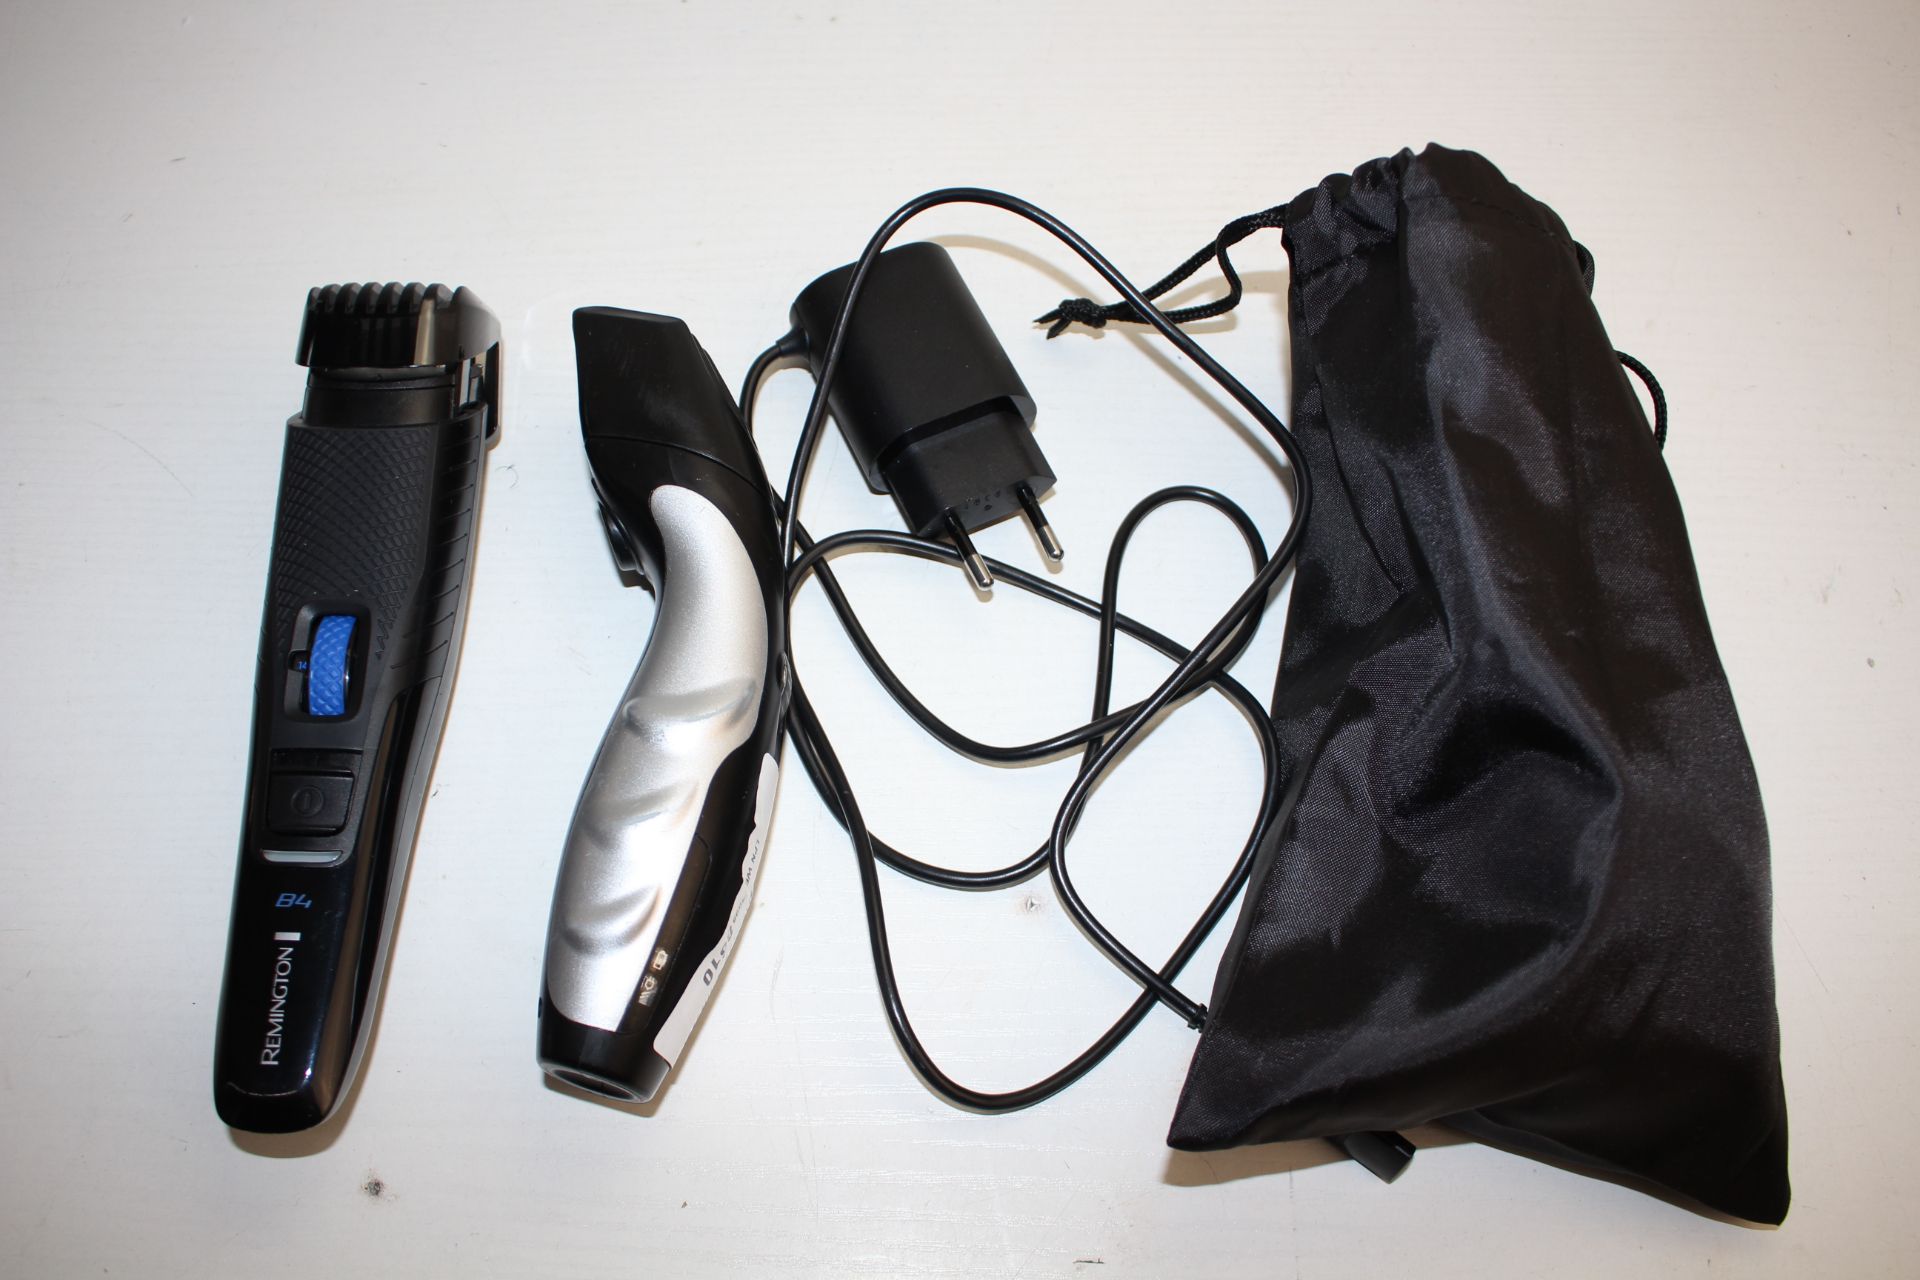 2X ASSORTED UNBOXED HAIR TRIMMERS (IMAGE DEPICTS STOCK)Condition ReportAppraisal Available on